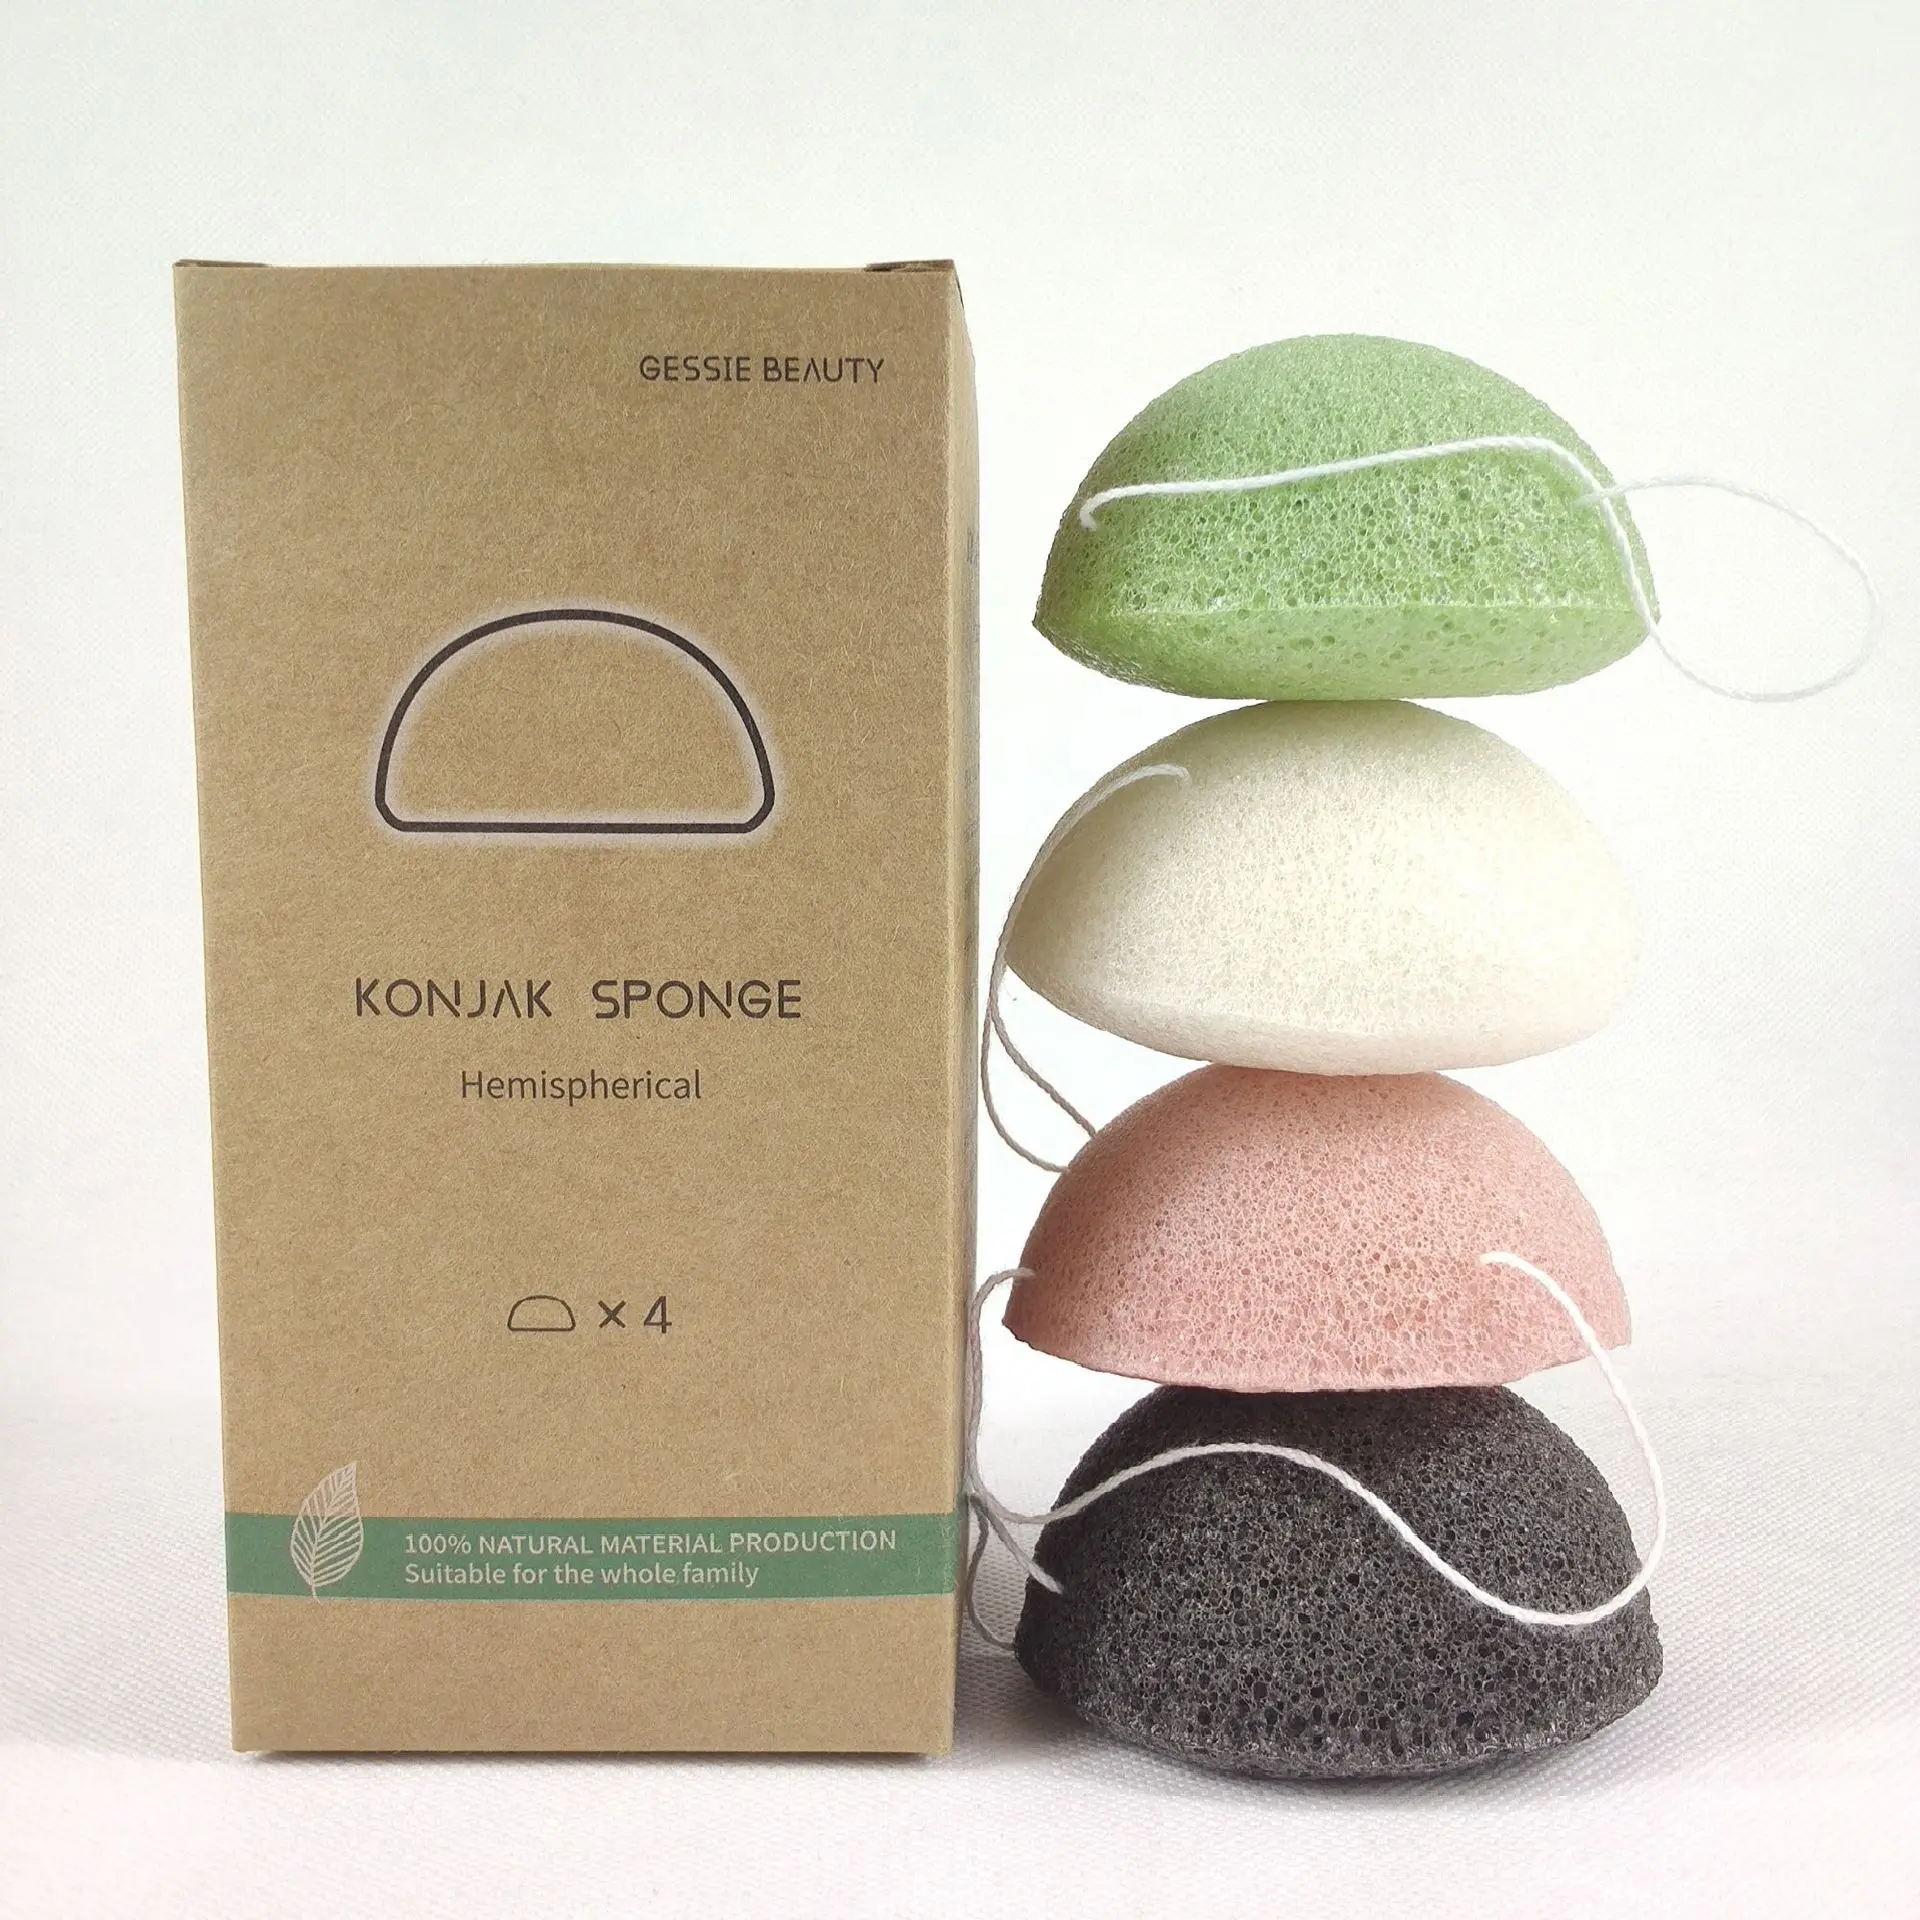 

2Pack 4Pack 100% Natural Facial Exfoliating Skin Care Private Label Organic Konjac Sponge With Box, White,purple,black,green,yellow,pink